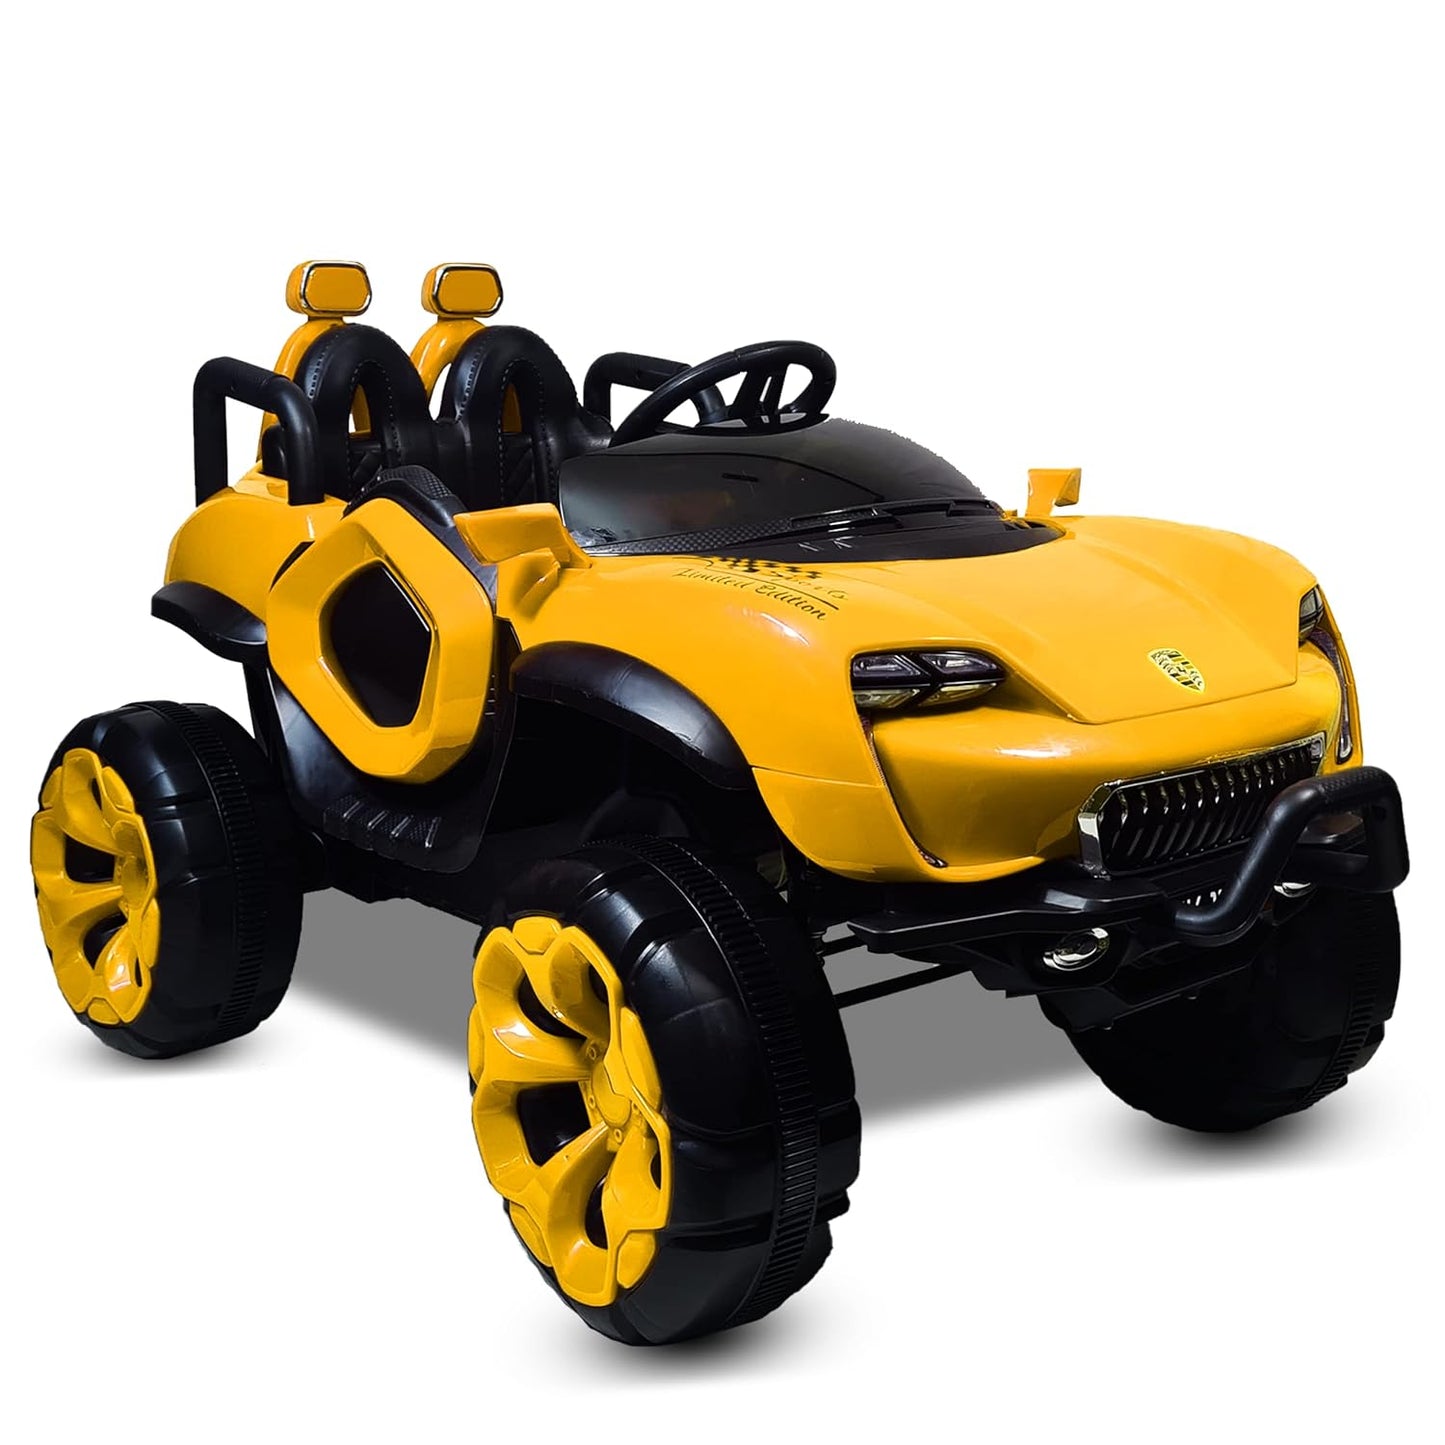 GettBoles Max-D Ride on Monster Truck Jeep for Kids- The Electric Rechargeable Big Wheeler Jeep with Colored Alloys, Music, Led Lights and Swing| Battery Car for 2 to 8 Years Kid (Yellow)